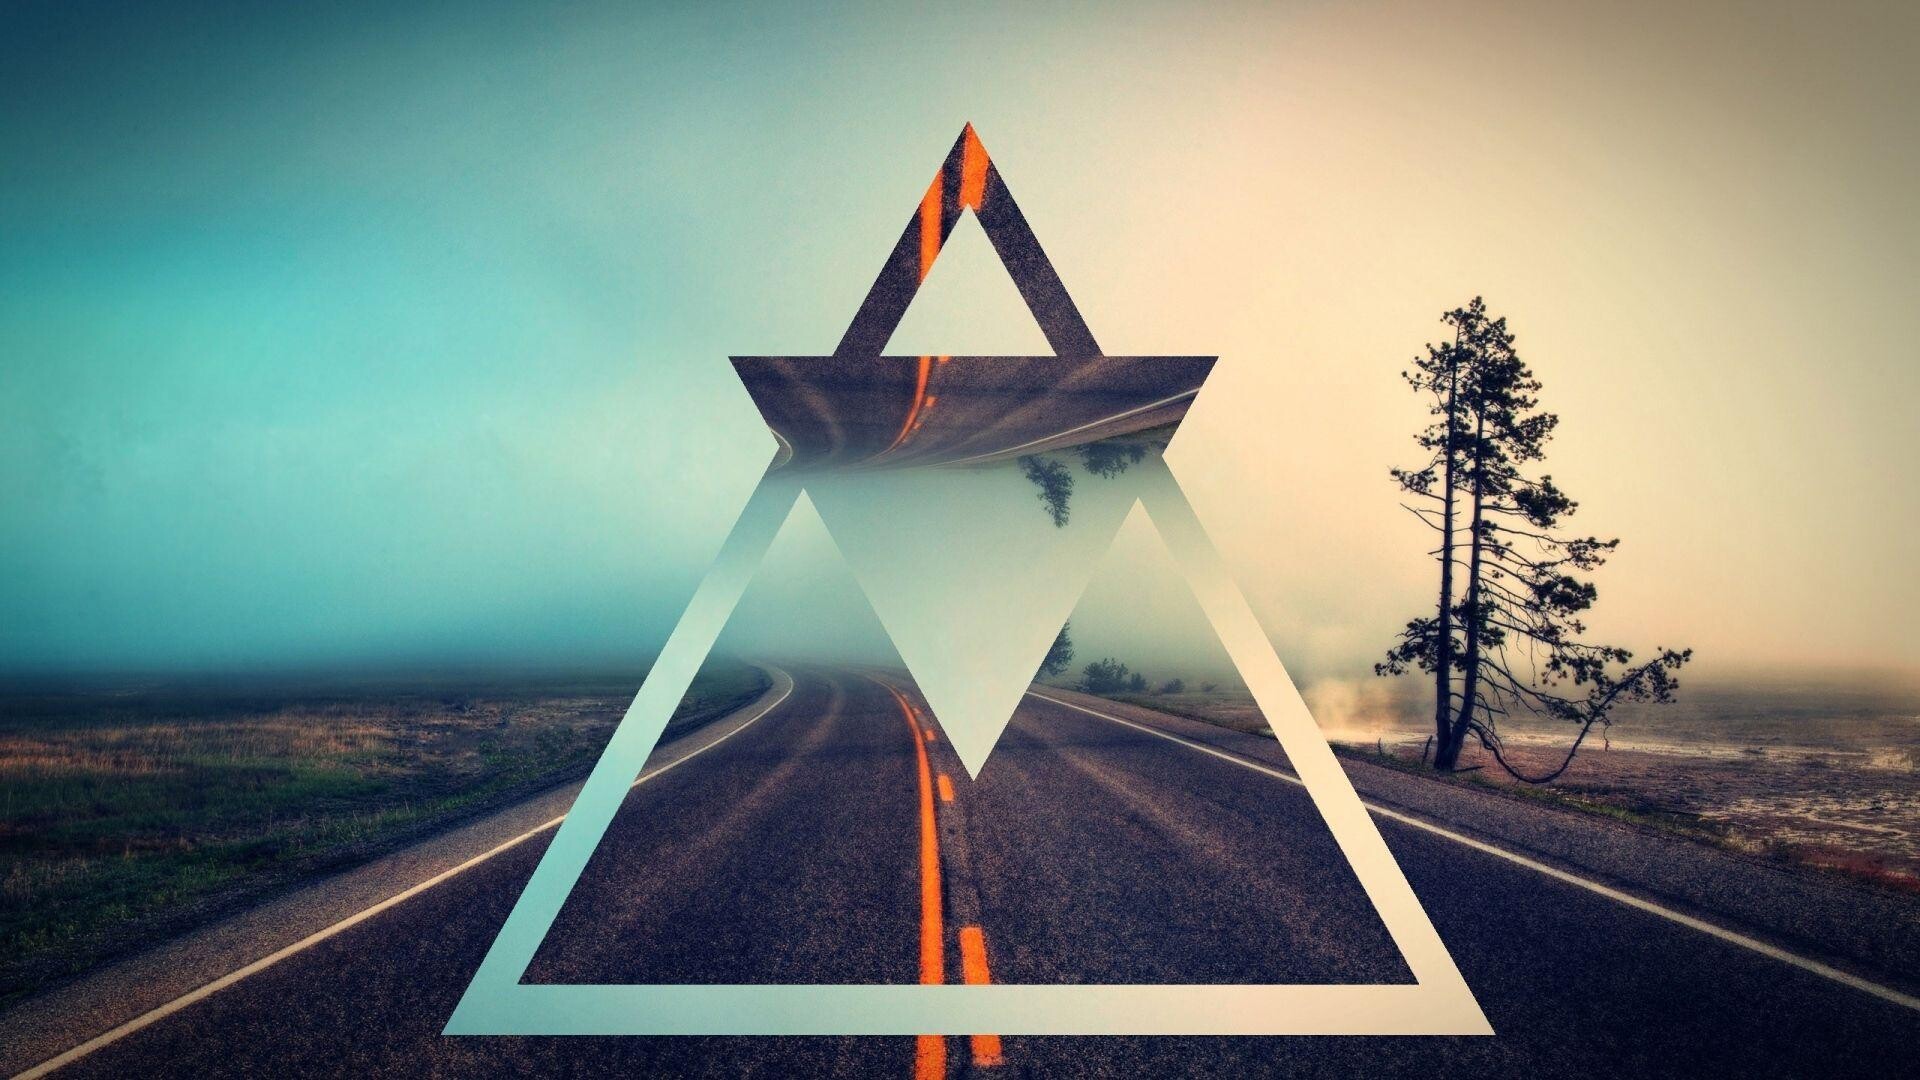 Triangle: Reflections, Symmetry, Foggy road, Acute angles. 1920x1080 Full HD Wallpaper.